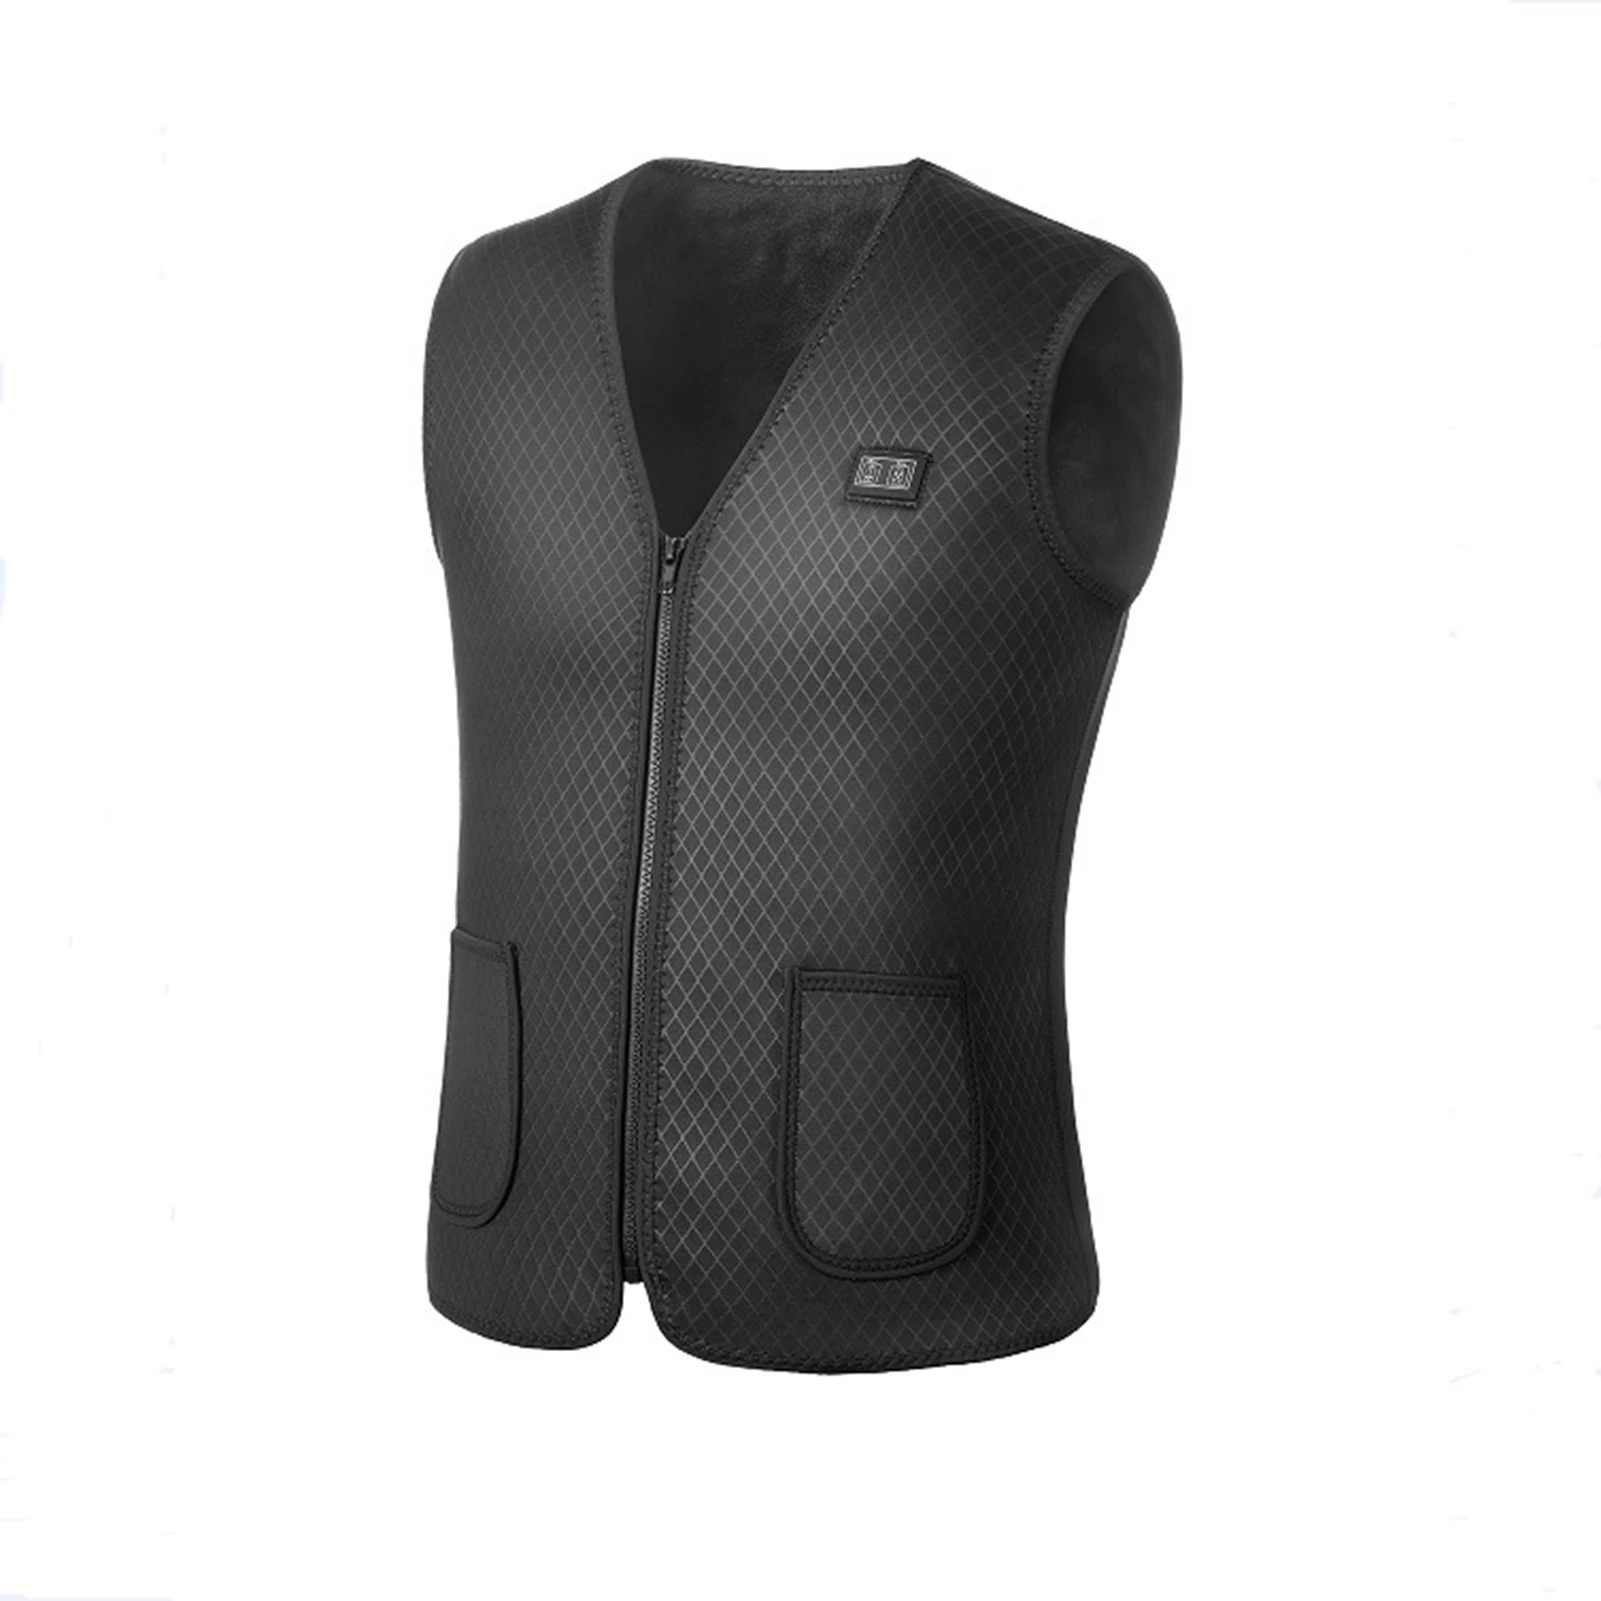 

Warming Heating Vest Body Temperature Control 3 Seconds Instant Heat for Mother Father Seniors Gift